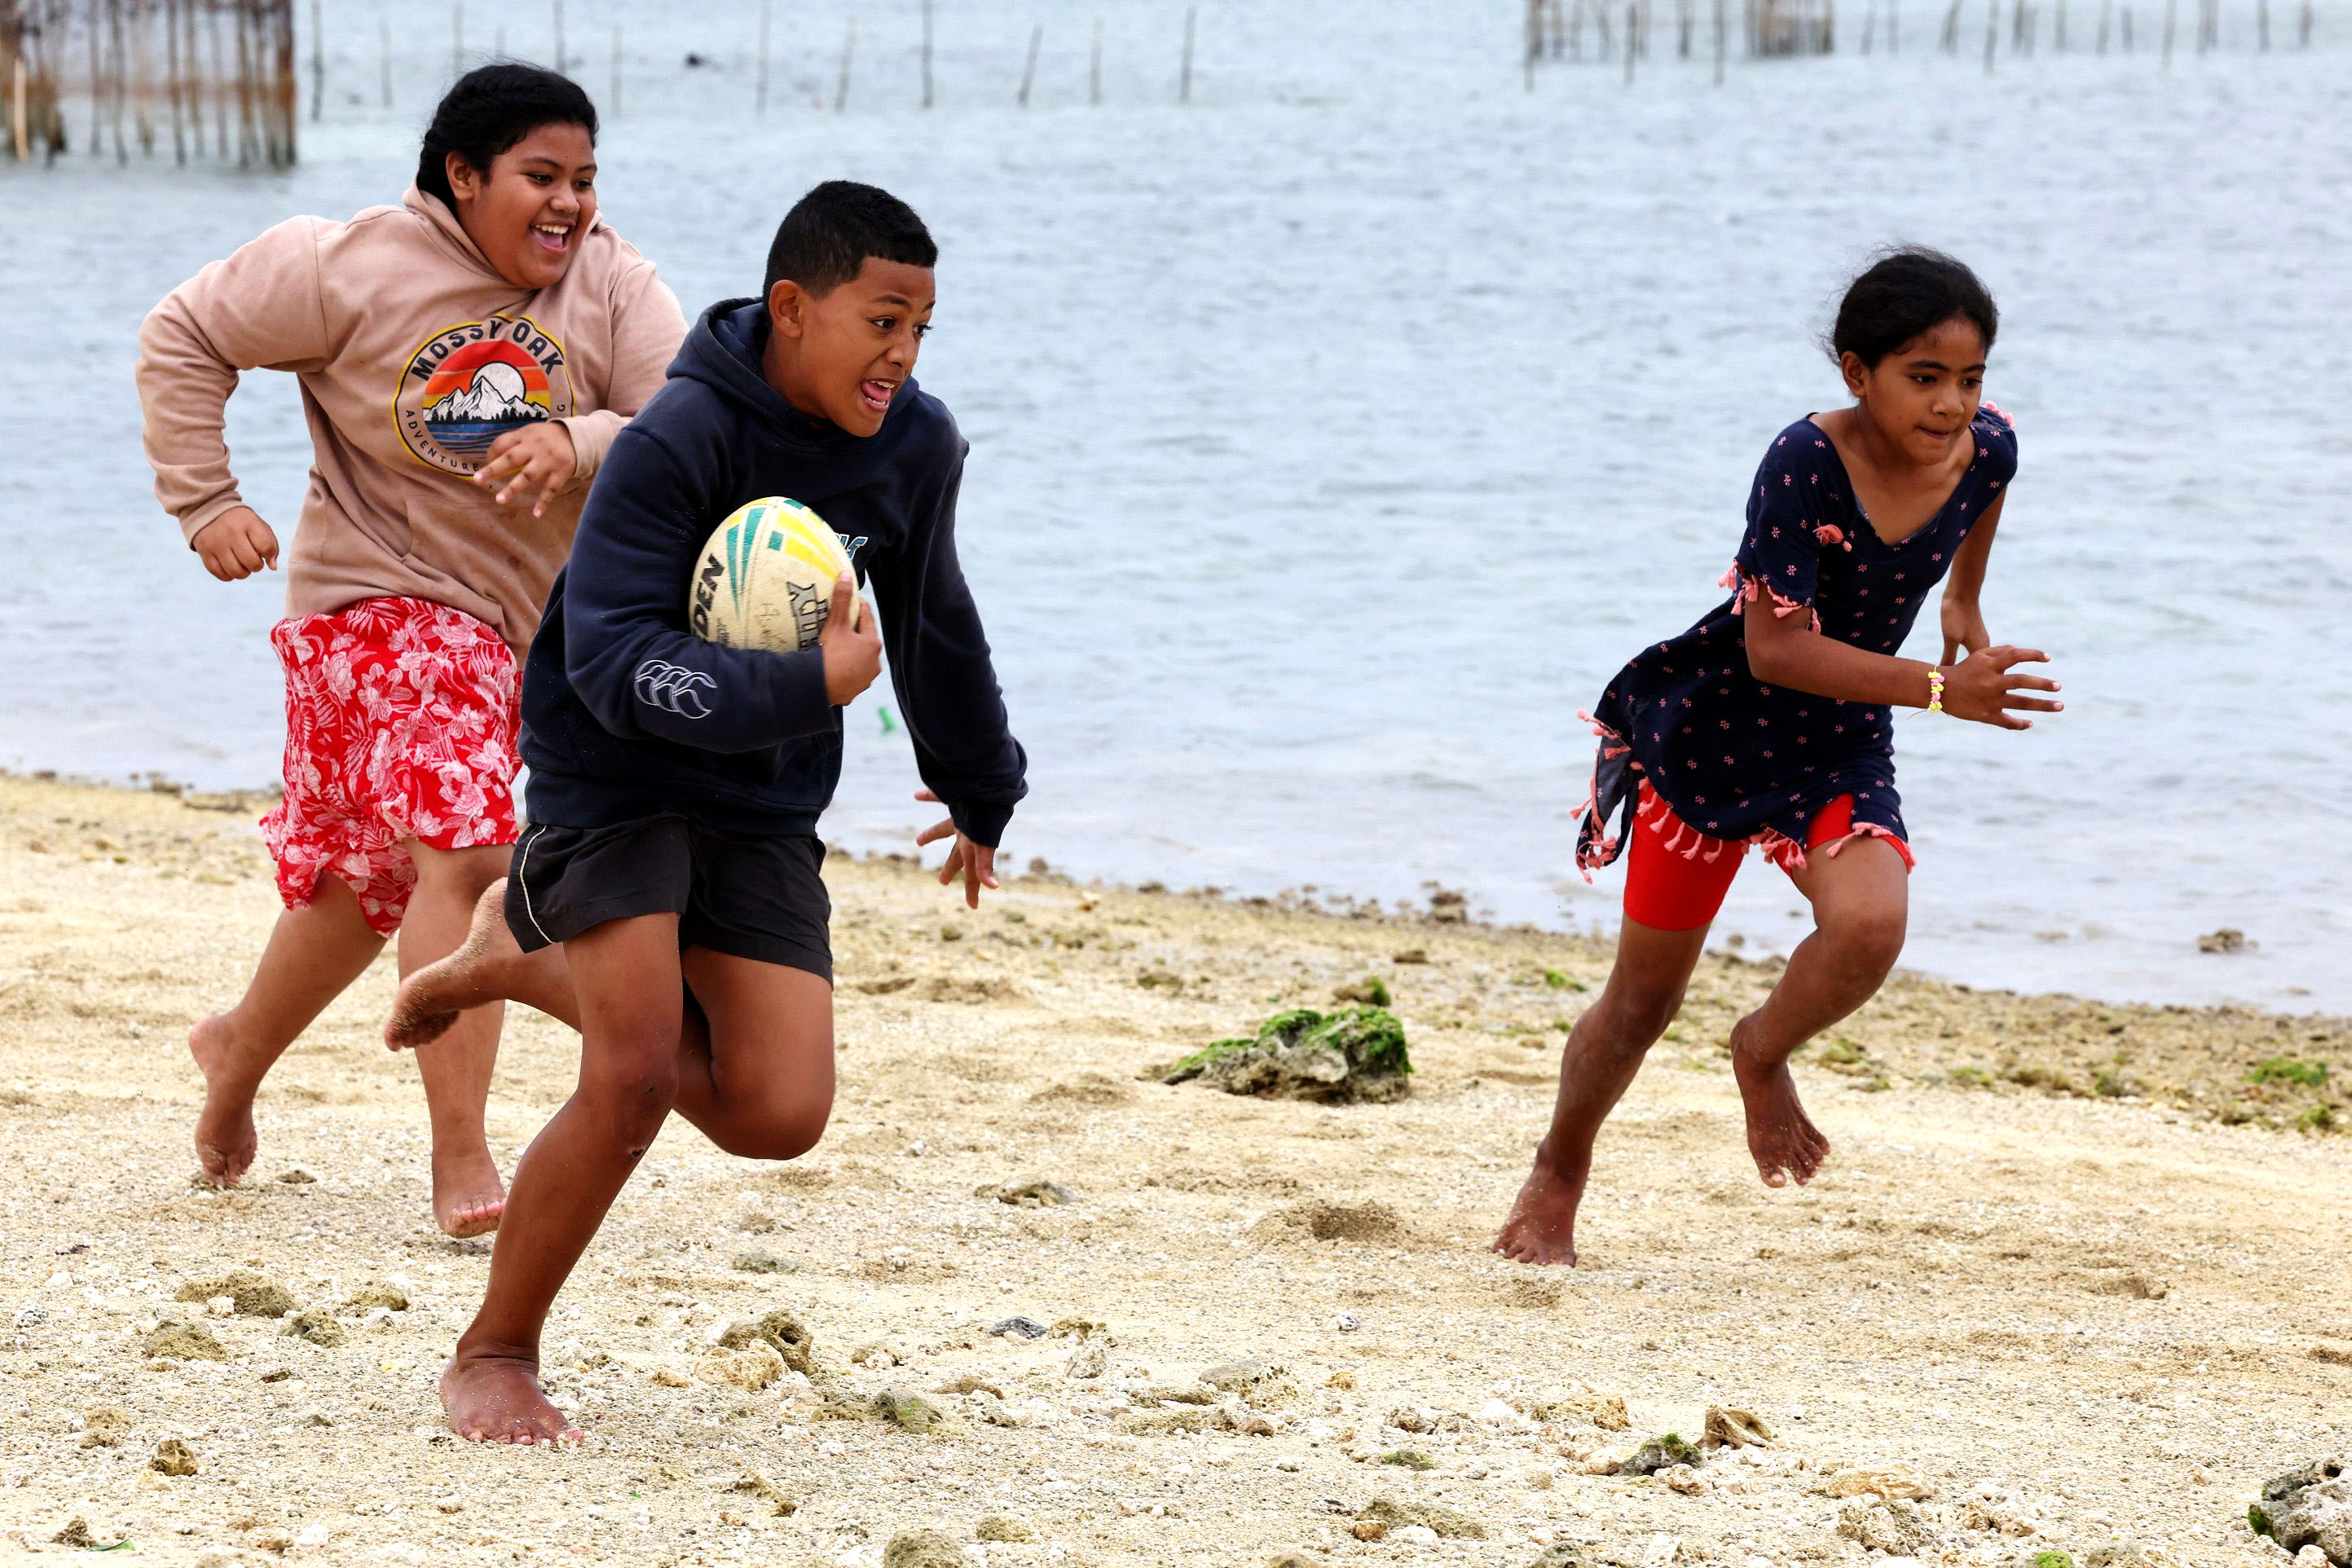 Lesieli, Siua and Sisi play a game of touch rugby by the beach at Popua on July 20, 2023, in Nuku’alofa while their families are fishing on the reef.
Image: Nuku Alofa, Tonga 